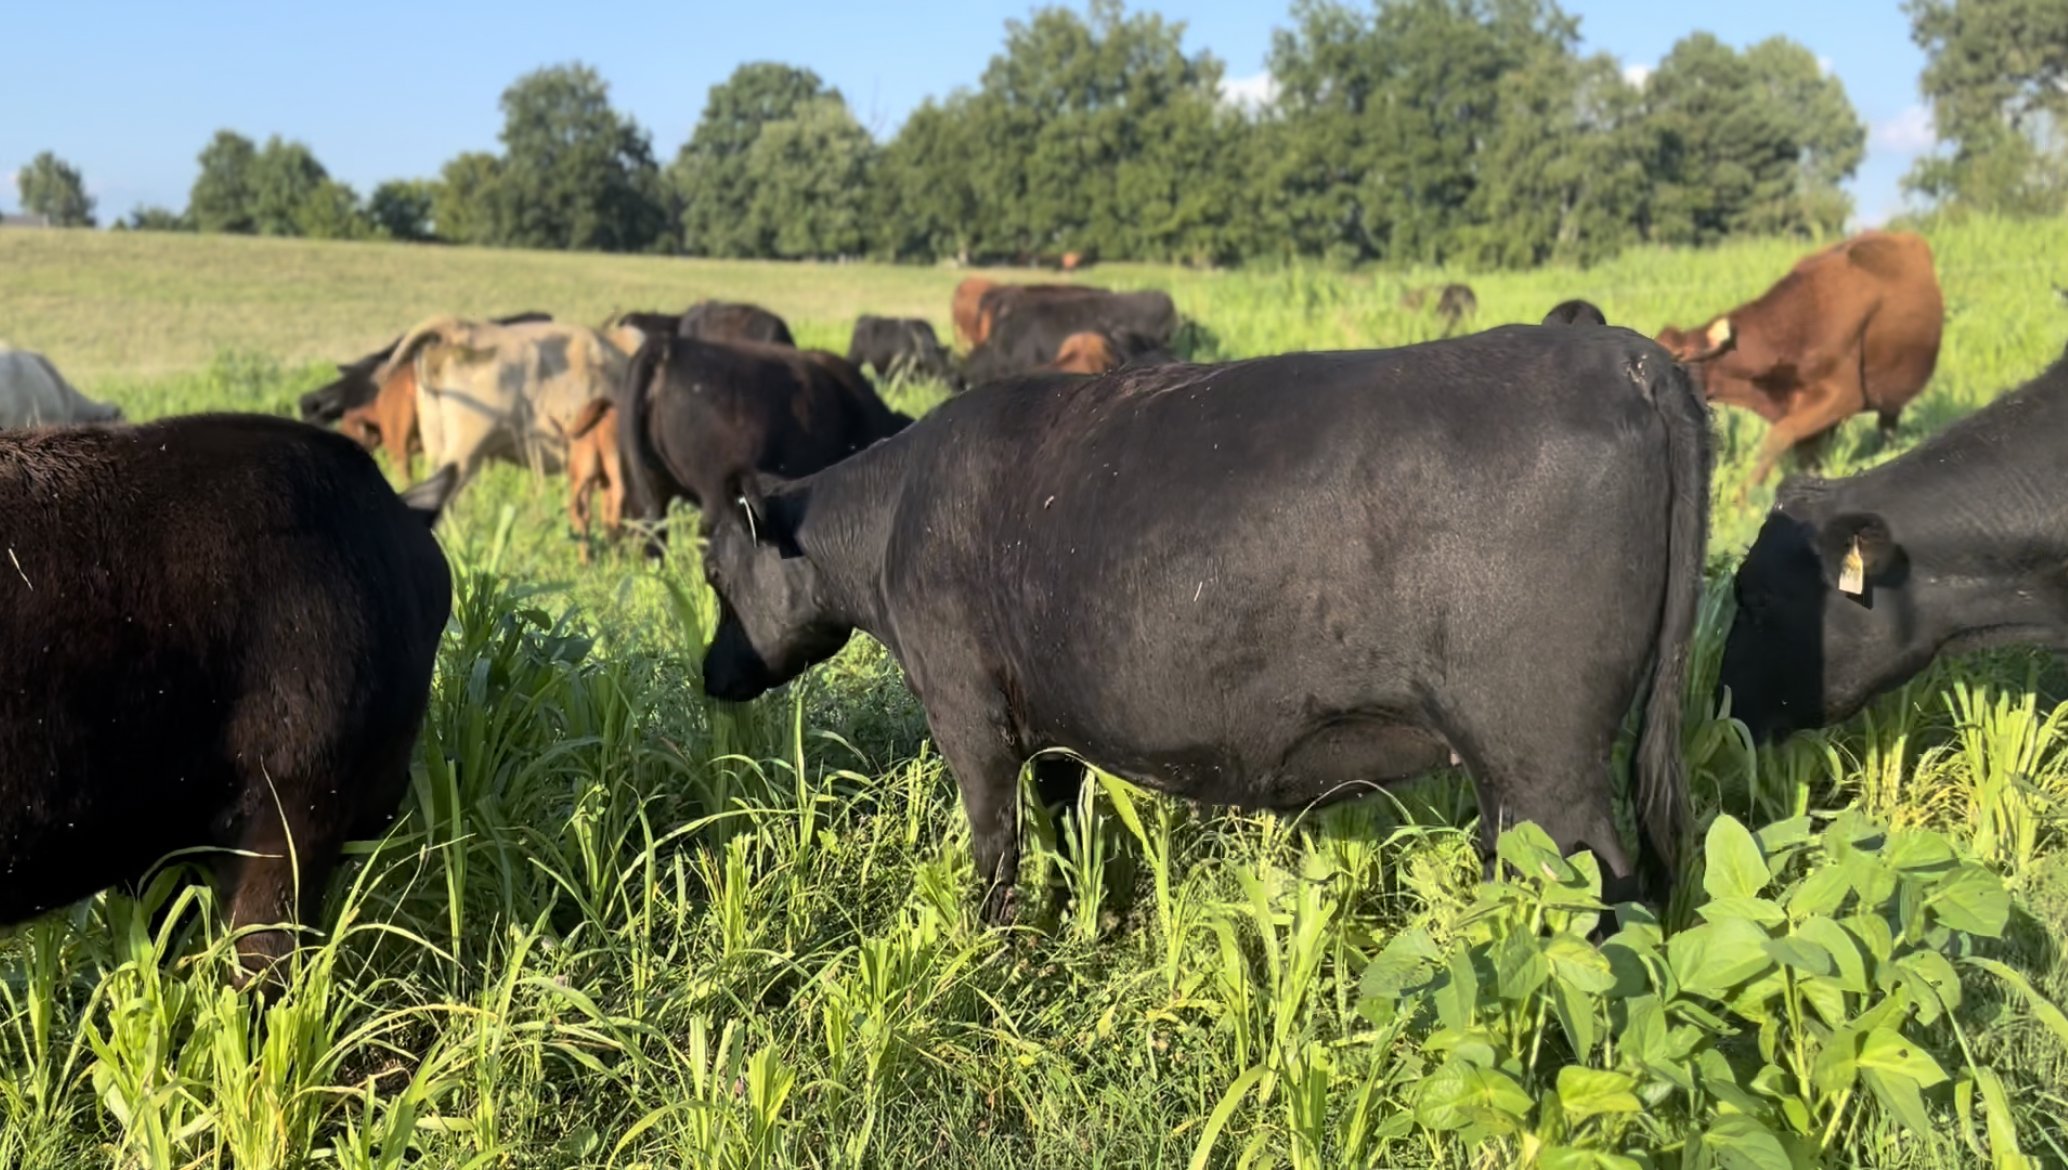 August 23 - Our cows are happy to graze the summer annuals!